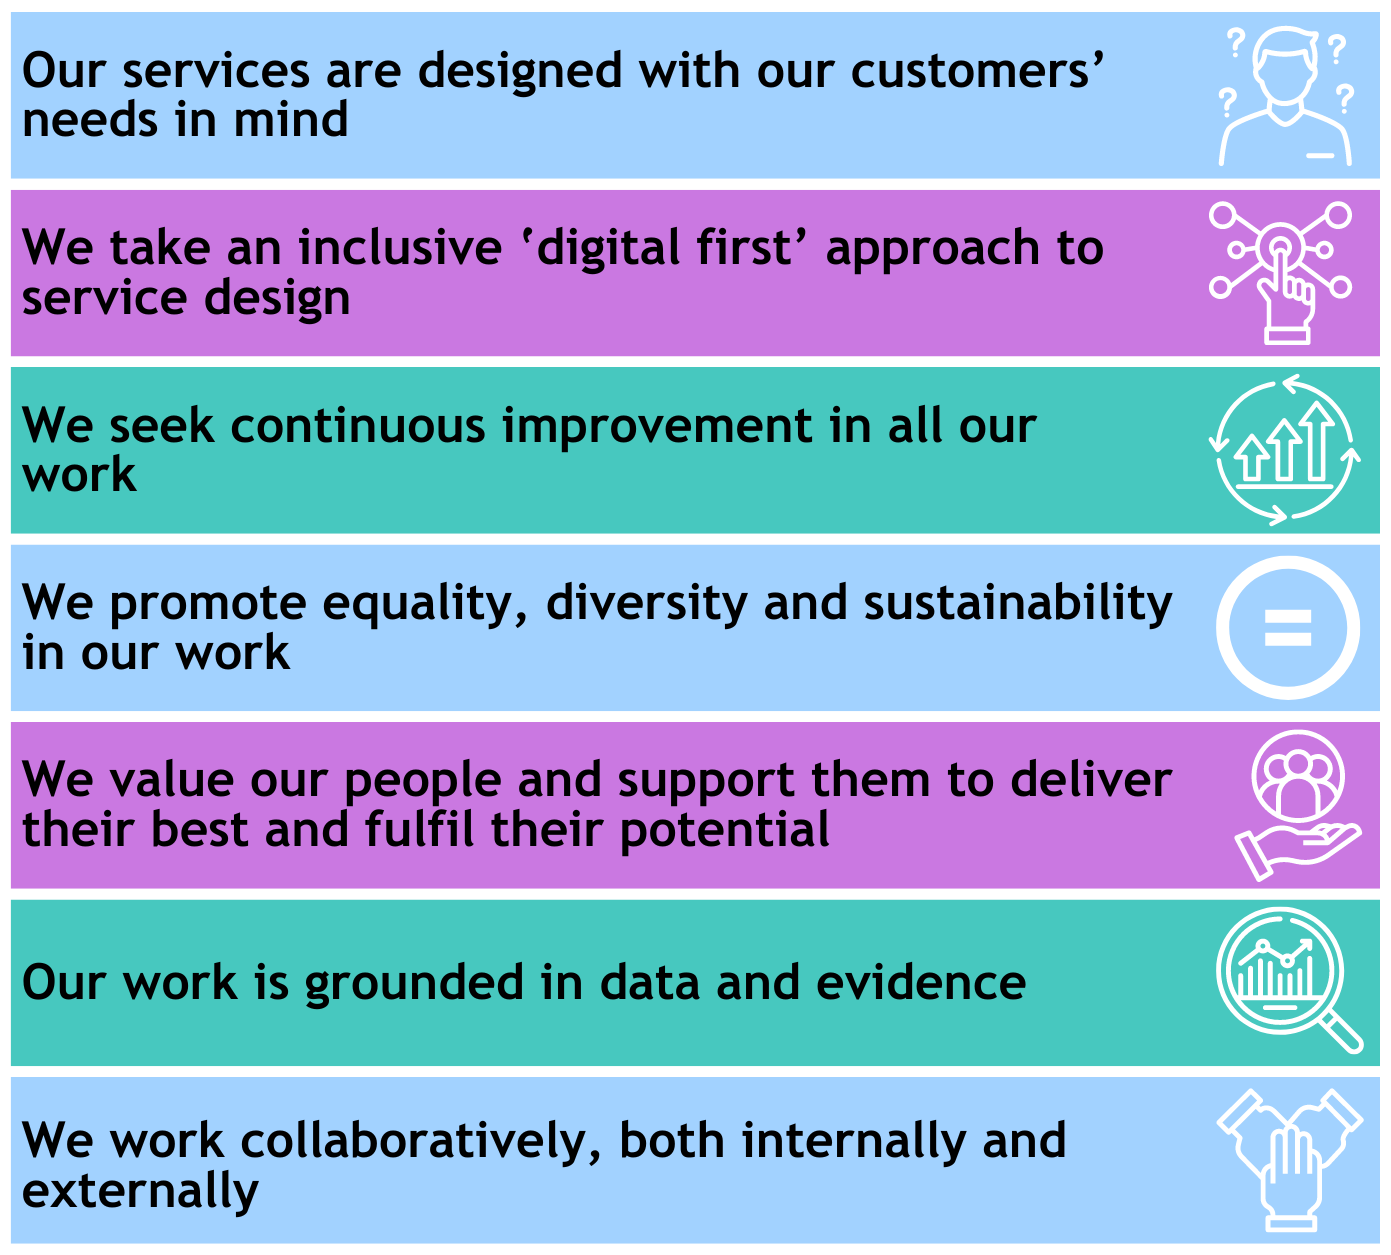 Our services are designed with our customers’ needs in mind. Our work is grounded in data and evidence. We take an inclusive ‘digital first’ approach to service design. We seek continuous improvement in all our work. We promote equality, diversity and sustainability in our work. We value our people and support them to deliver their best and fulfil their potential. We work collaboratively, both internally and externally.